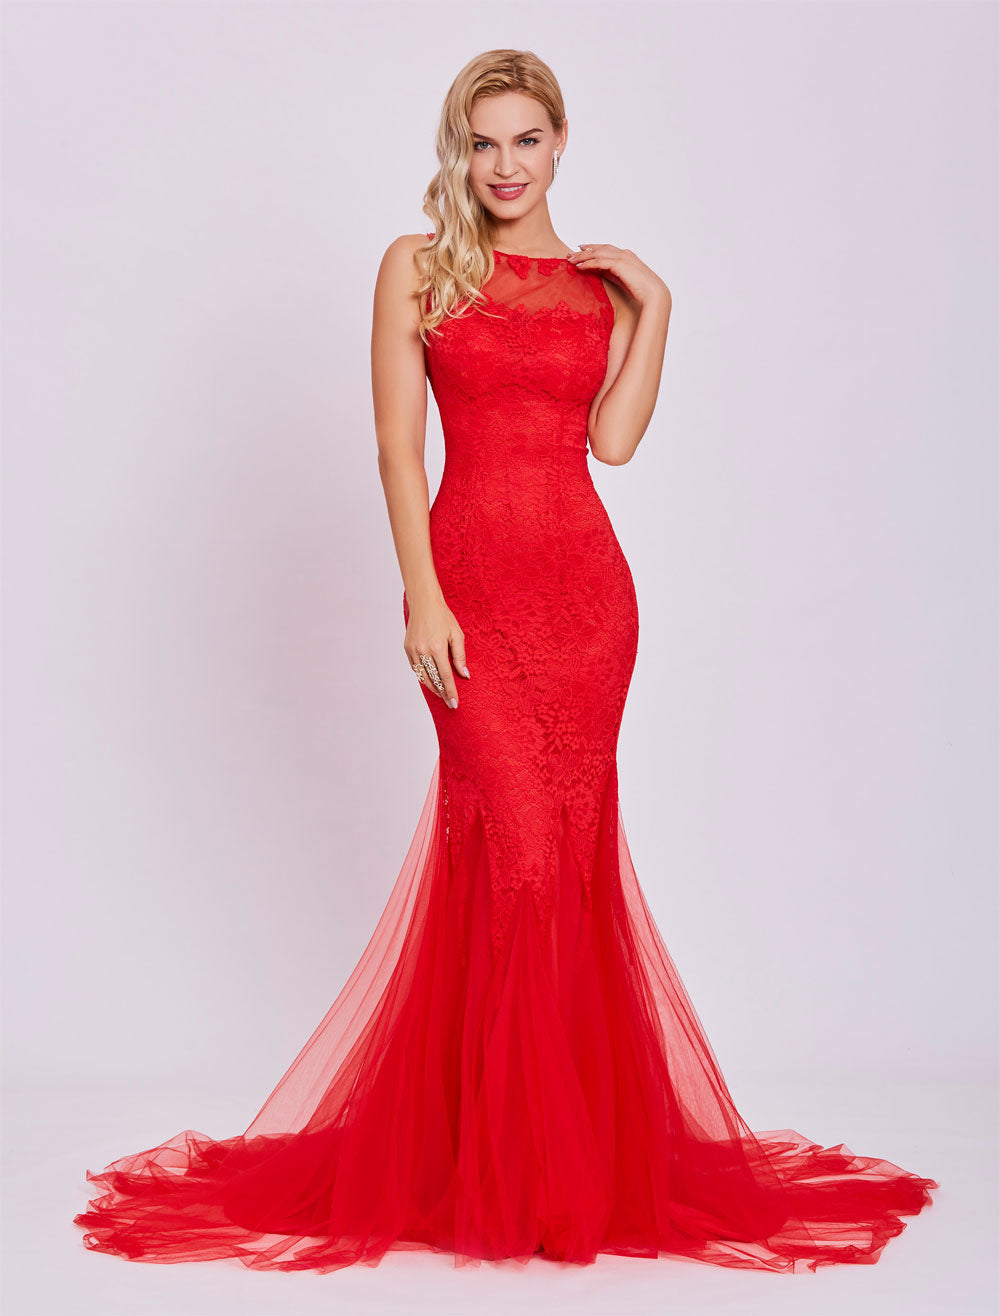 Classic Red Evening Dresses  Long Backless Sexy Evening Dress Lace Mermaid Tulle Formal Gown With Train wedding guest dress